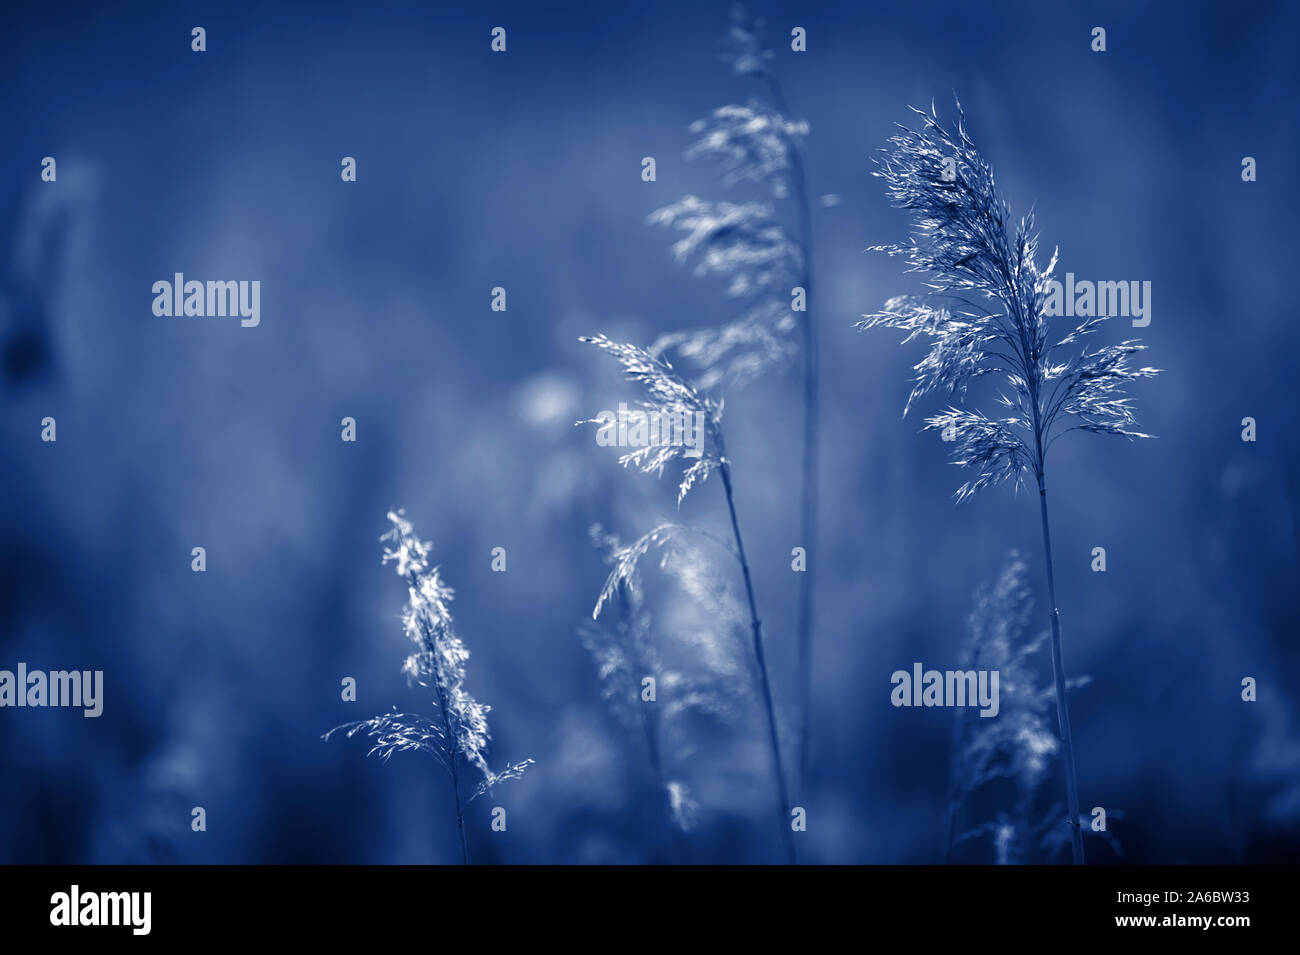 Common reed (Phragmites australis). Selective focus and shallow depth of field. Blue tone. Stock Photo